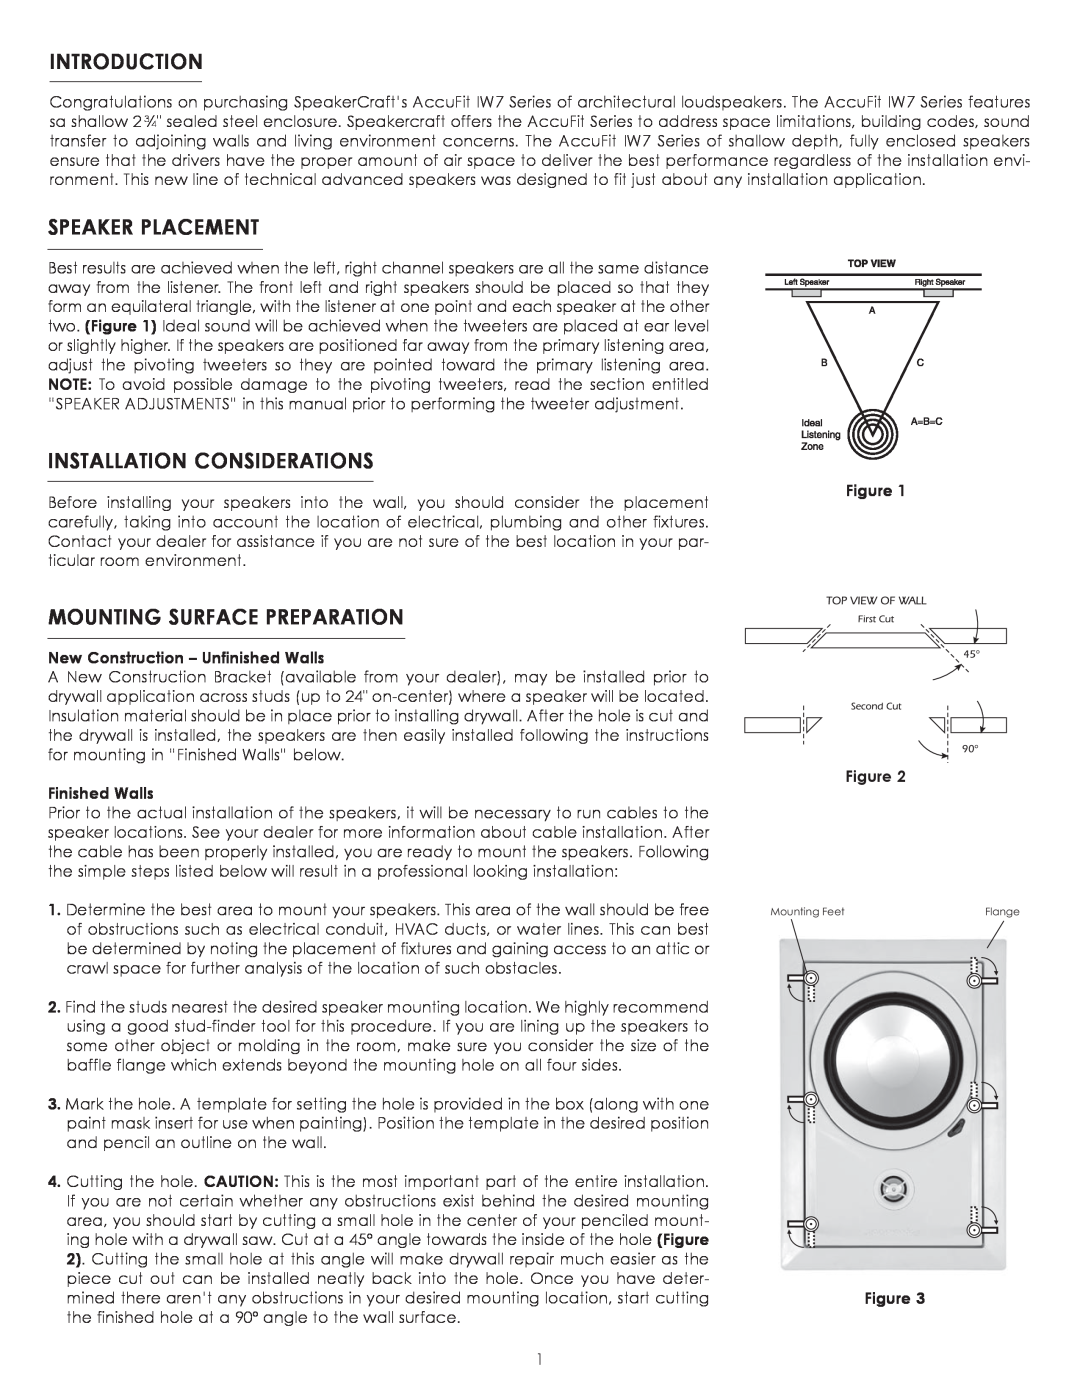 SpeakerCraft IW7 owner manual Introduction, Speaker Placement, Installation Considerations, Mounting Surface Preparation 